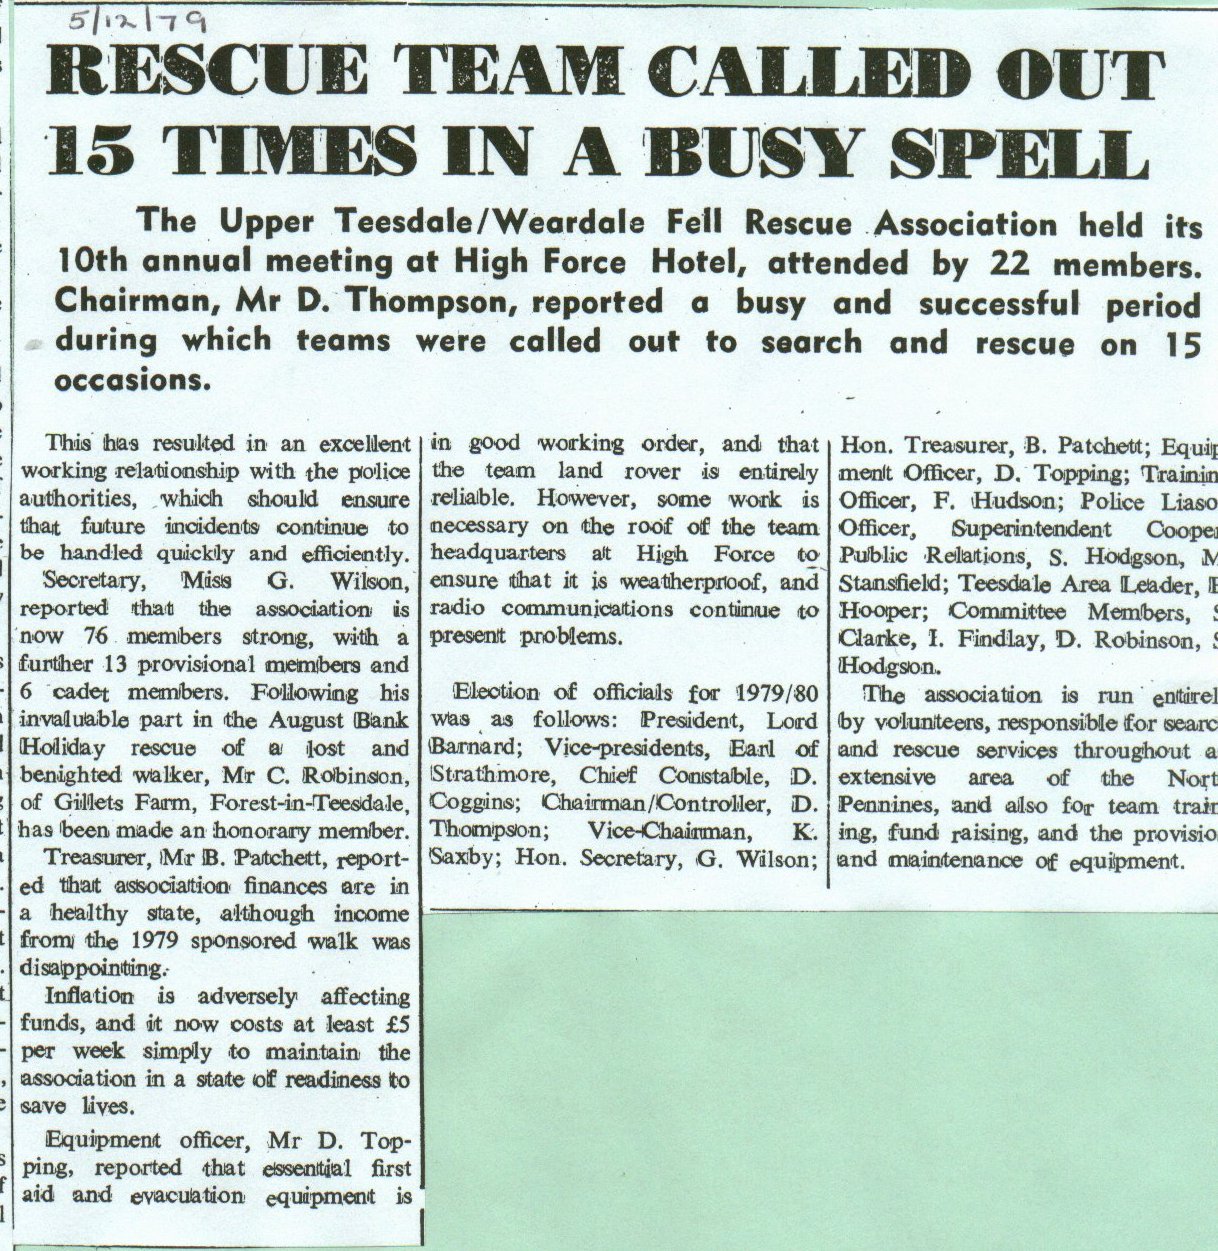  Rescue team called 15 times in a busy spell

AGM 